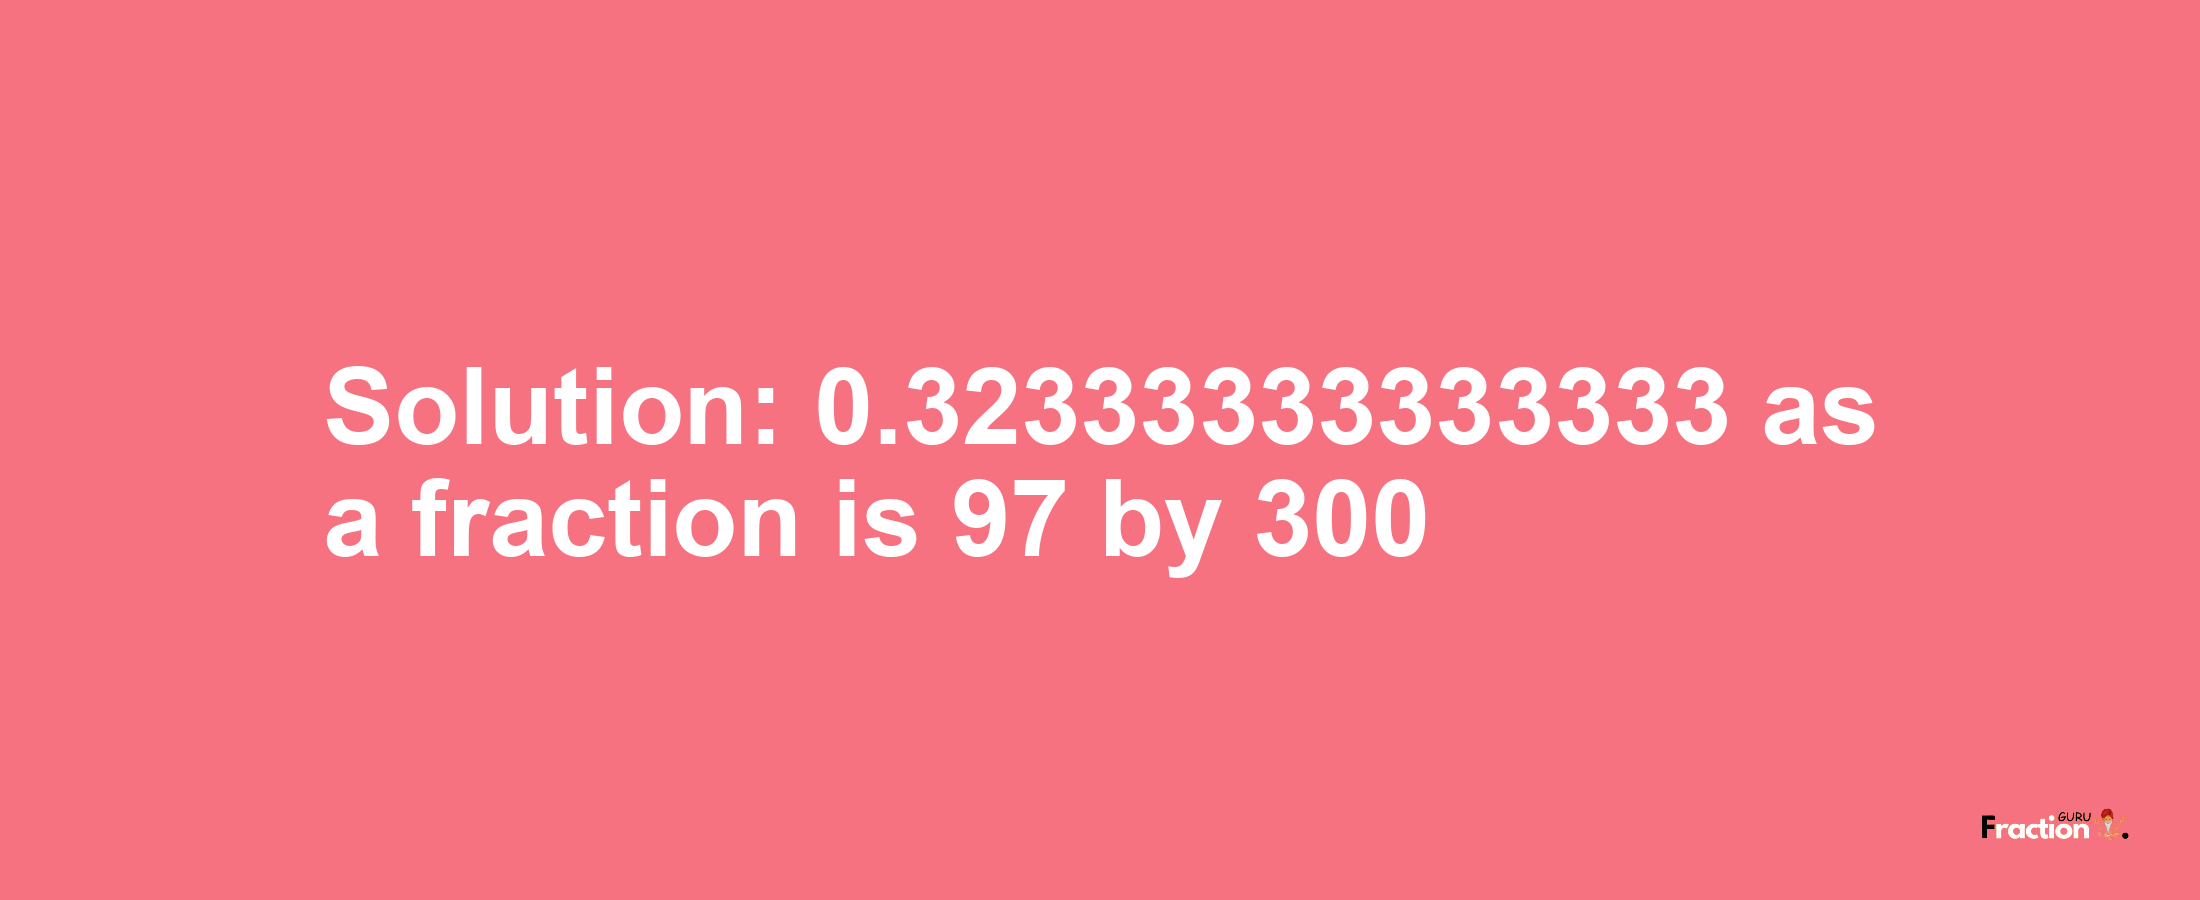 Solution:0.32333333333333 as a fraction is 97/300